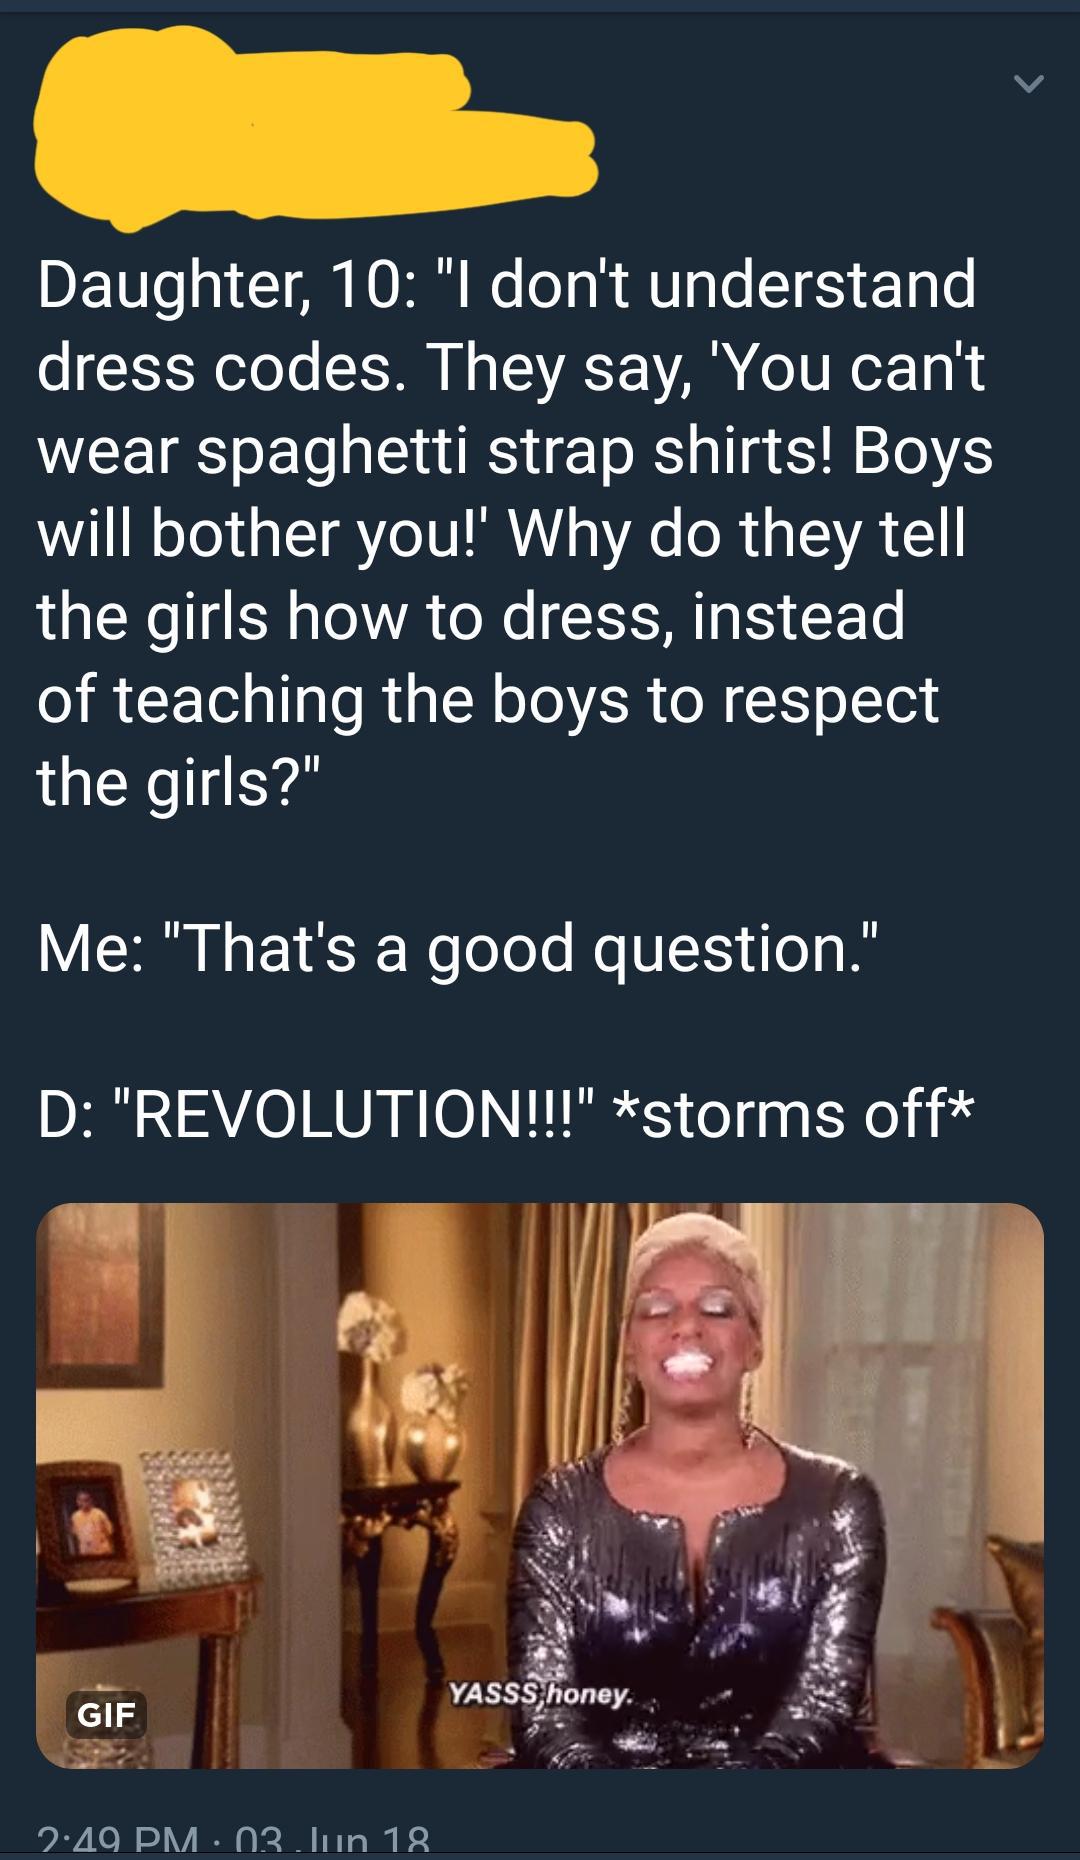 girl don t respect boy - Daughter, 10 "I don't understand dress codes. They say, 'You can't wear spaghetti strap shirts! Boys will bother you! Why do they tell the girls how to dress, instead of teaching the boys to respect the girls?" Me "That's a good q